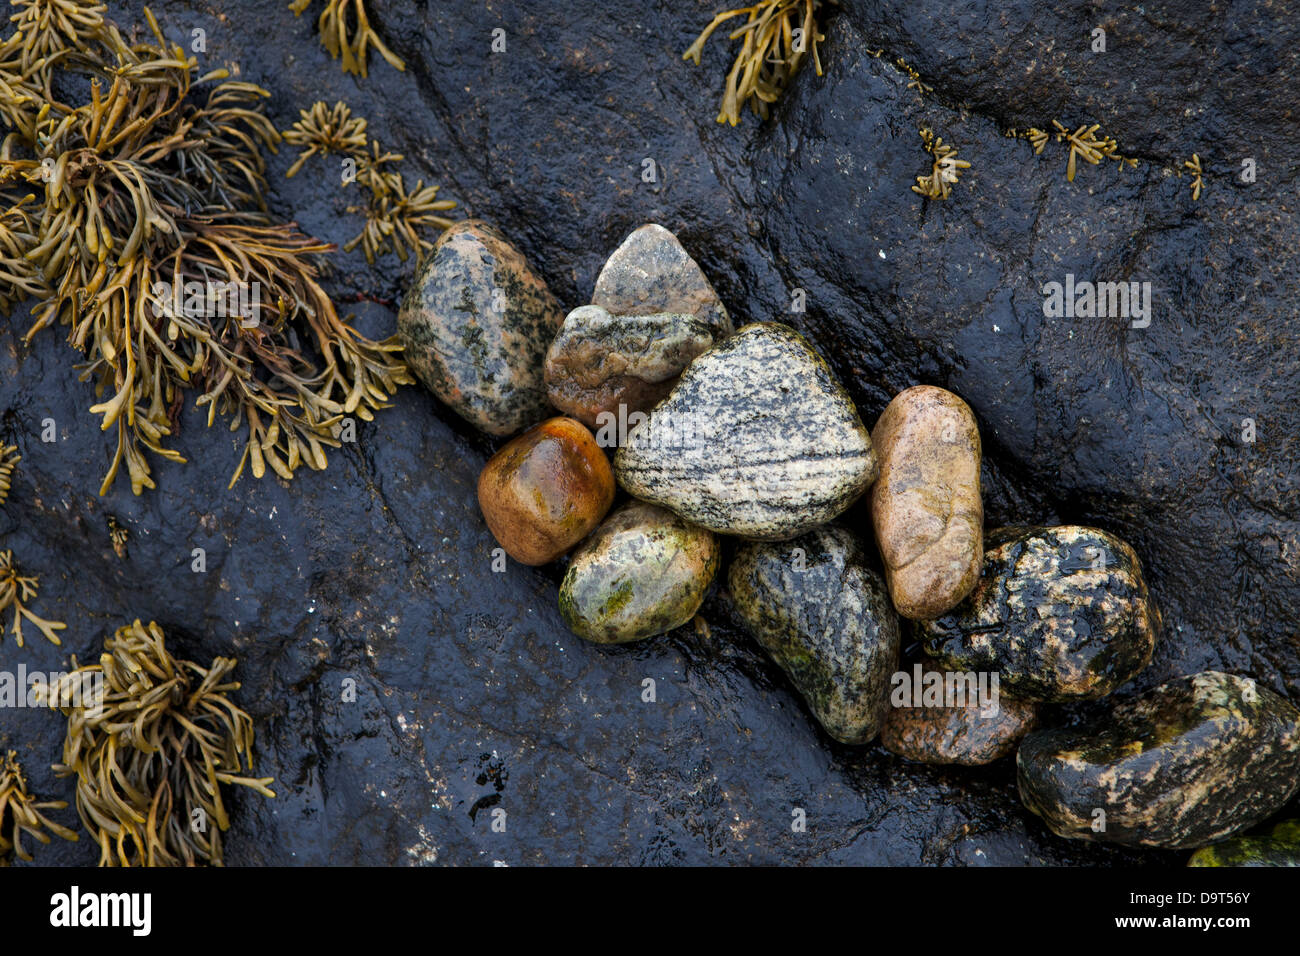 details on the beach at Lochinver, Sutherland, Scotland, UK Stock Photo